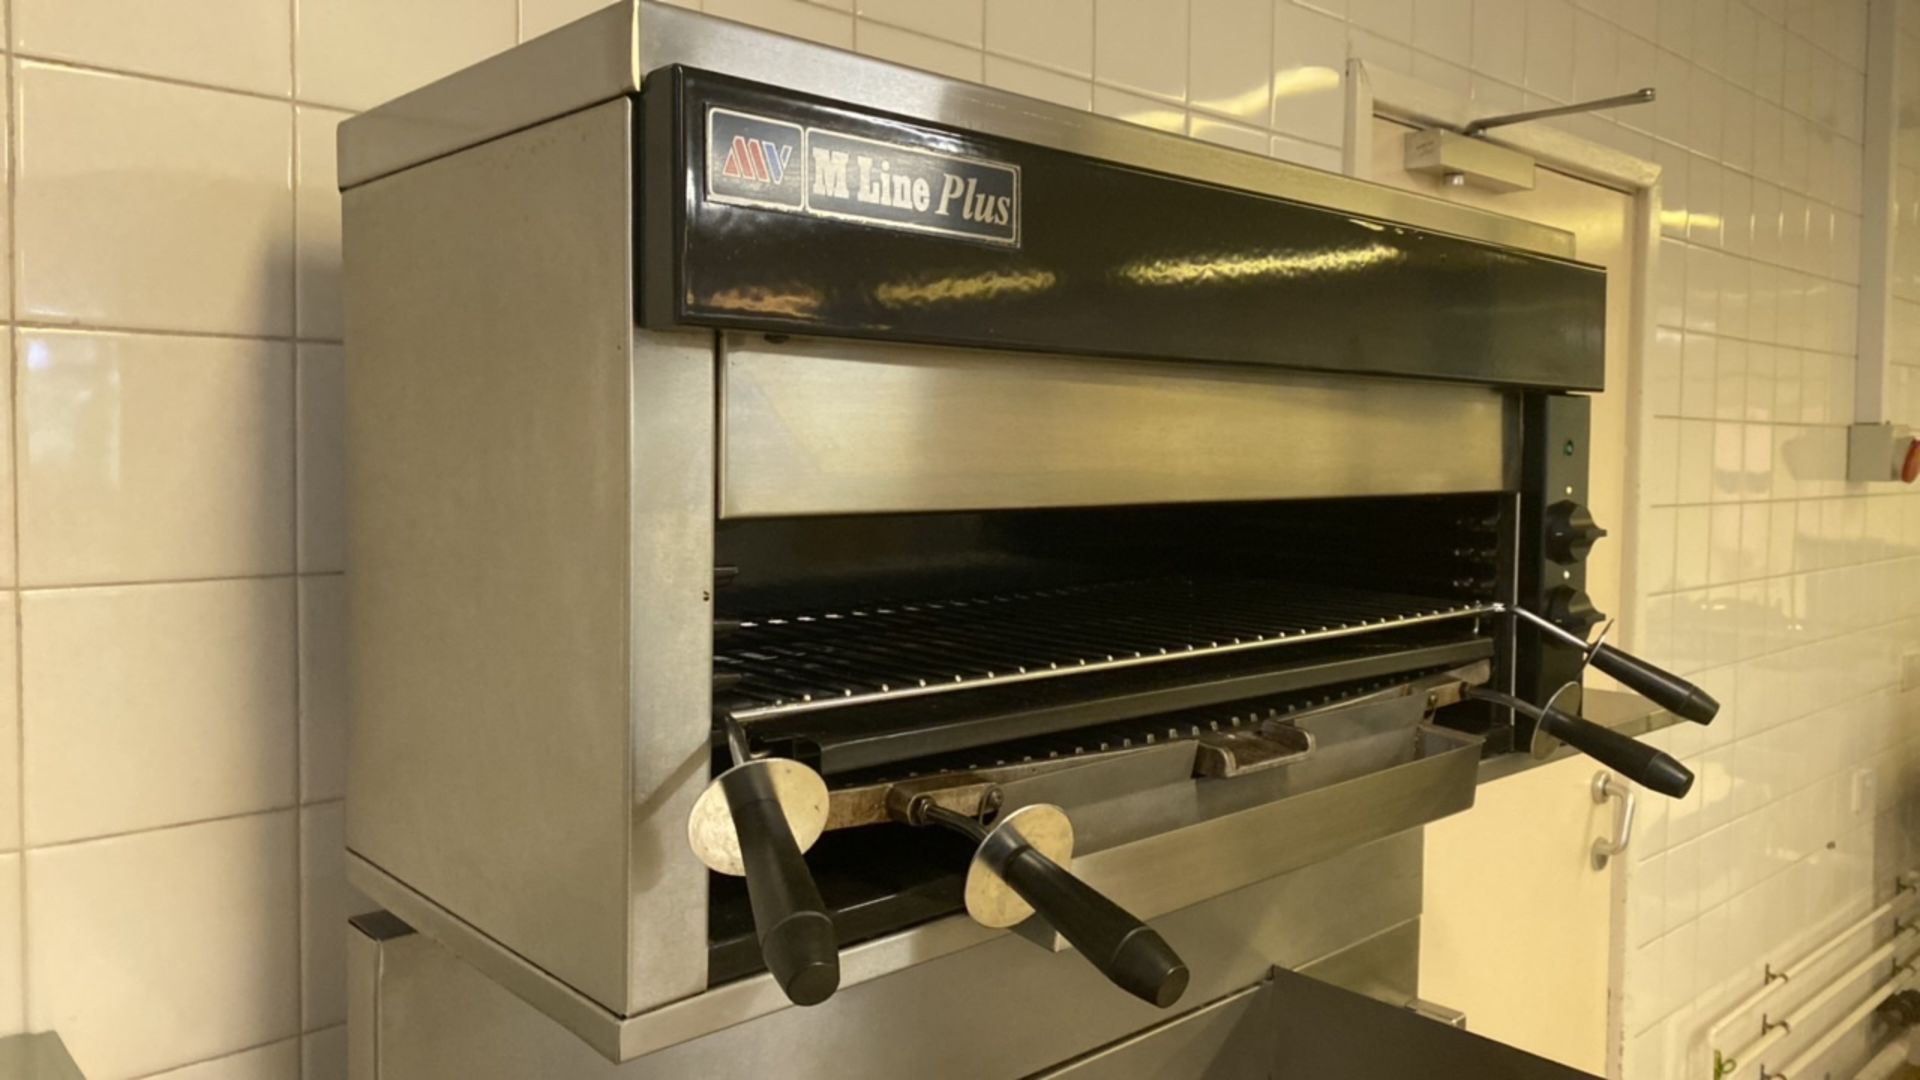 Morewood M Line Plus Grill - Image 2 of 4